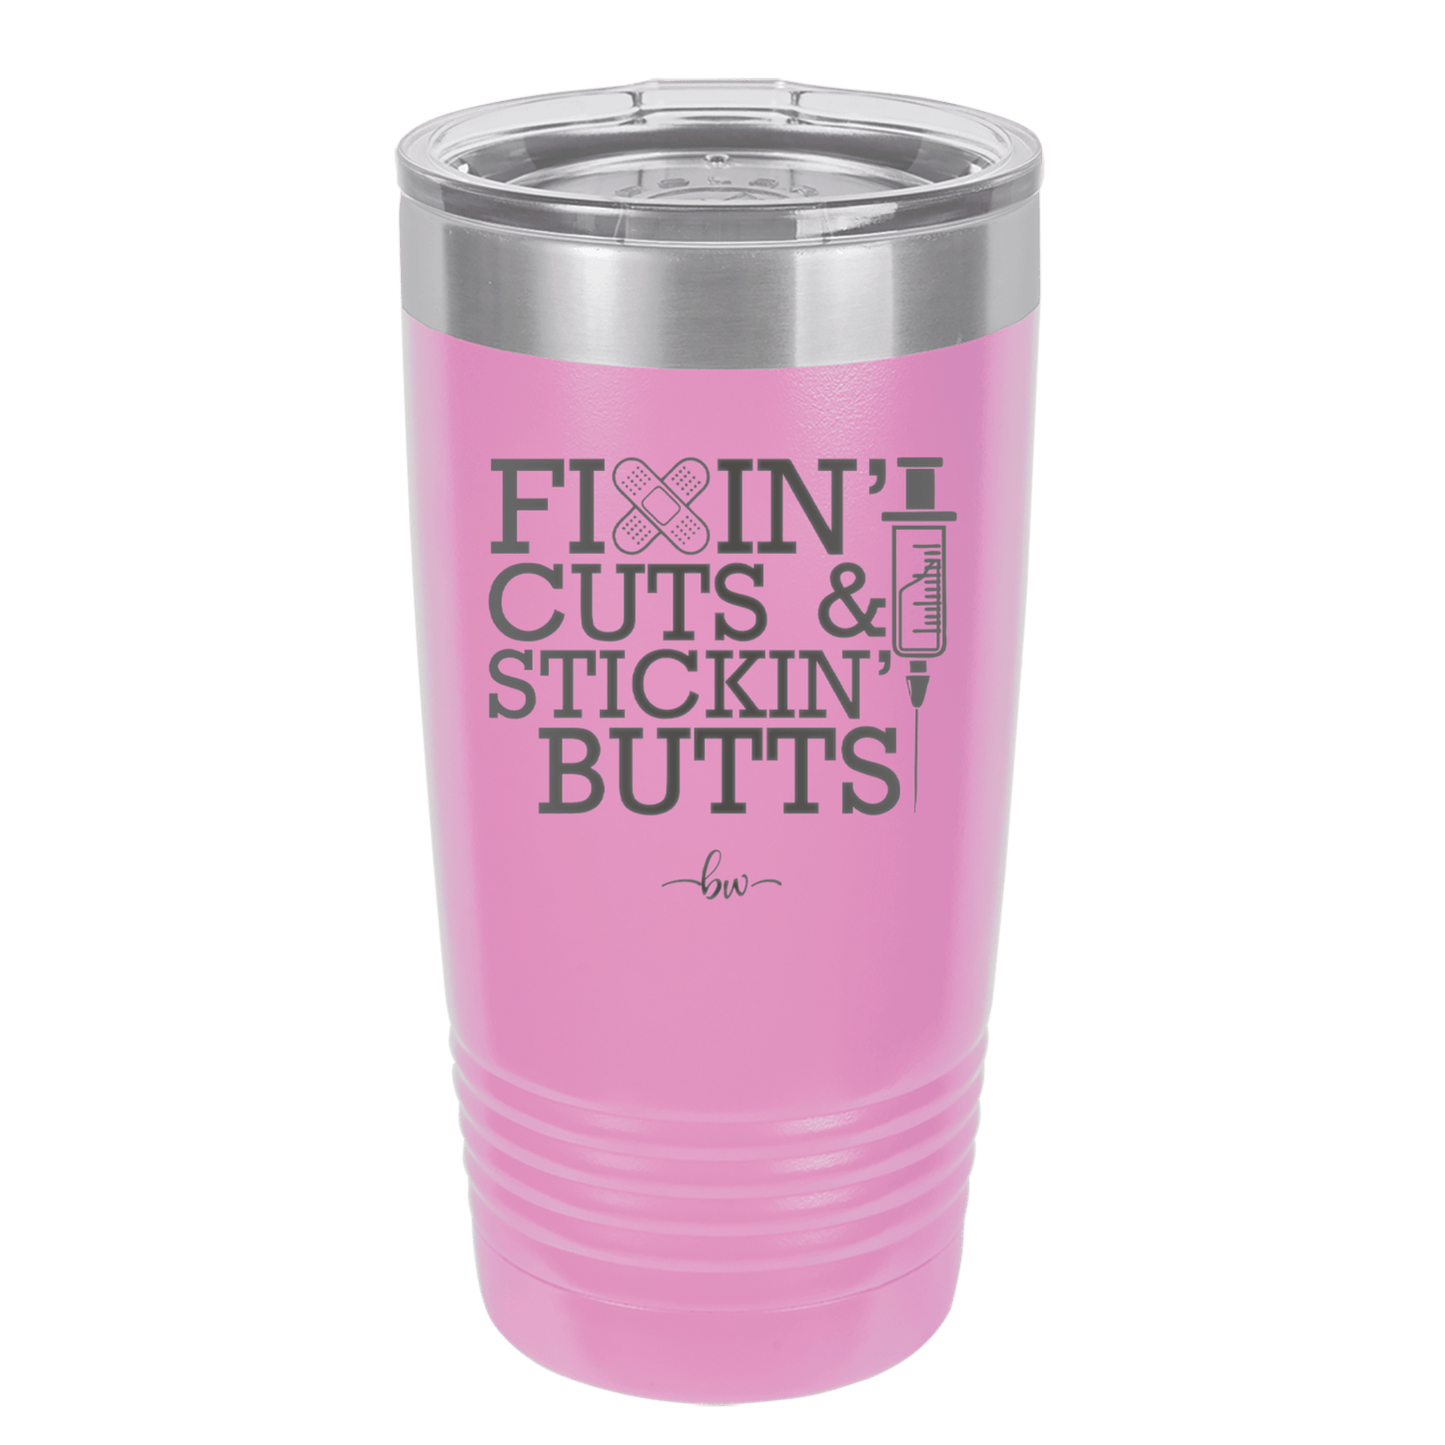 Fixin Cuts and Stickin Butts Nurse 2 - Laser Engraved Stainless Steel Drinkware - 1288 -